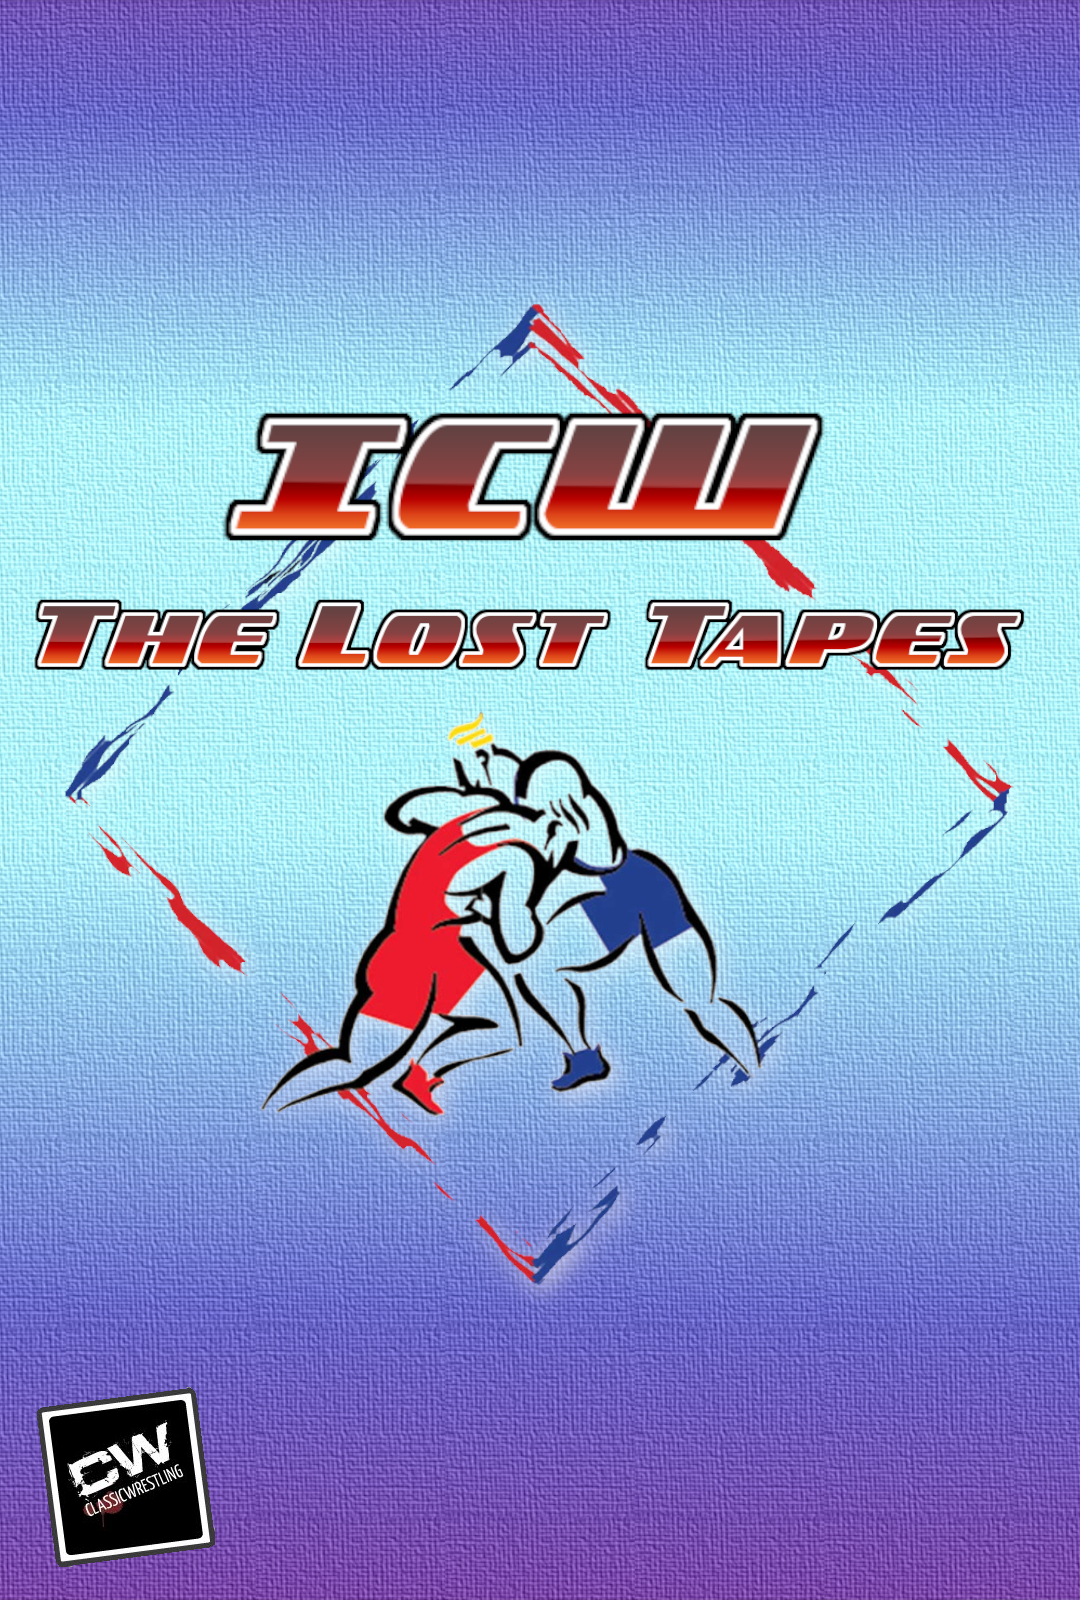 ICW: The Lost Tapes (Poffo Territory)